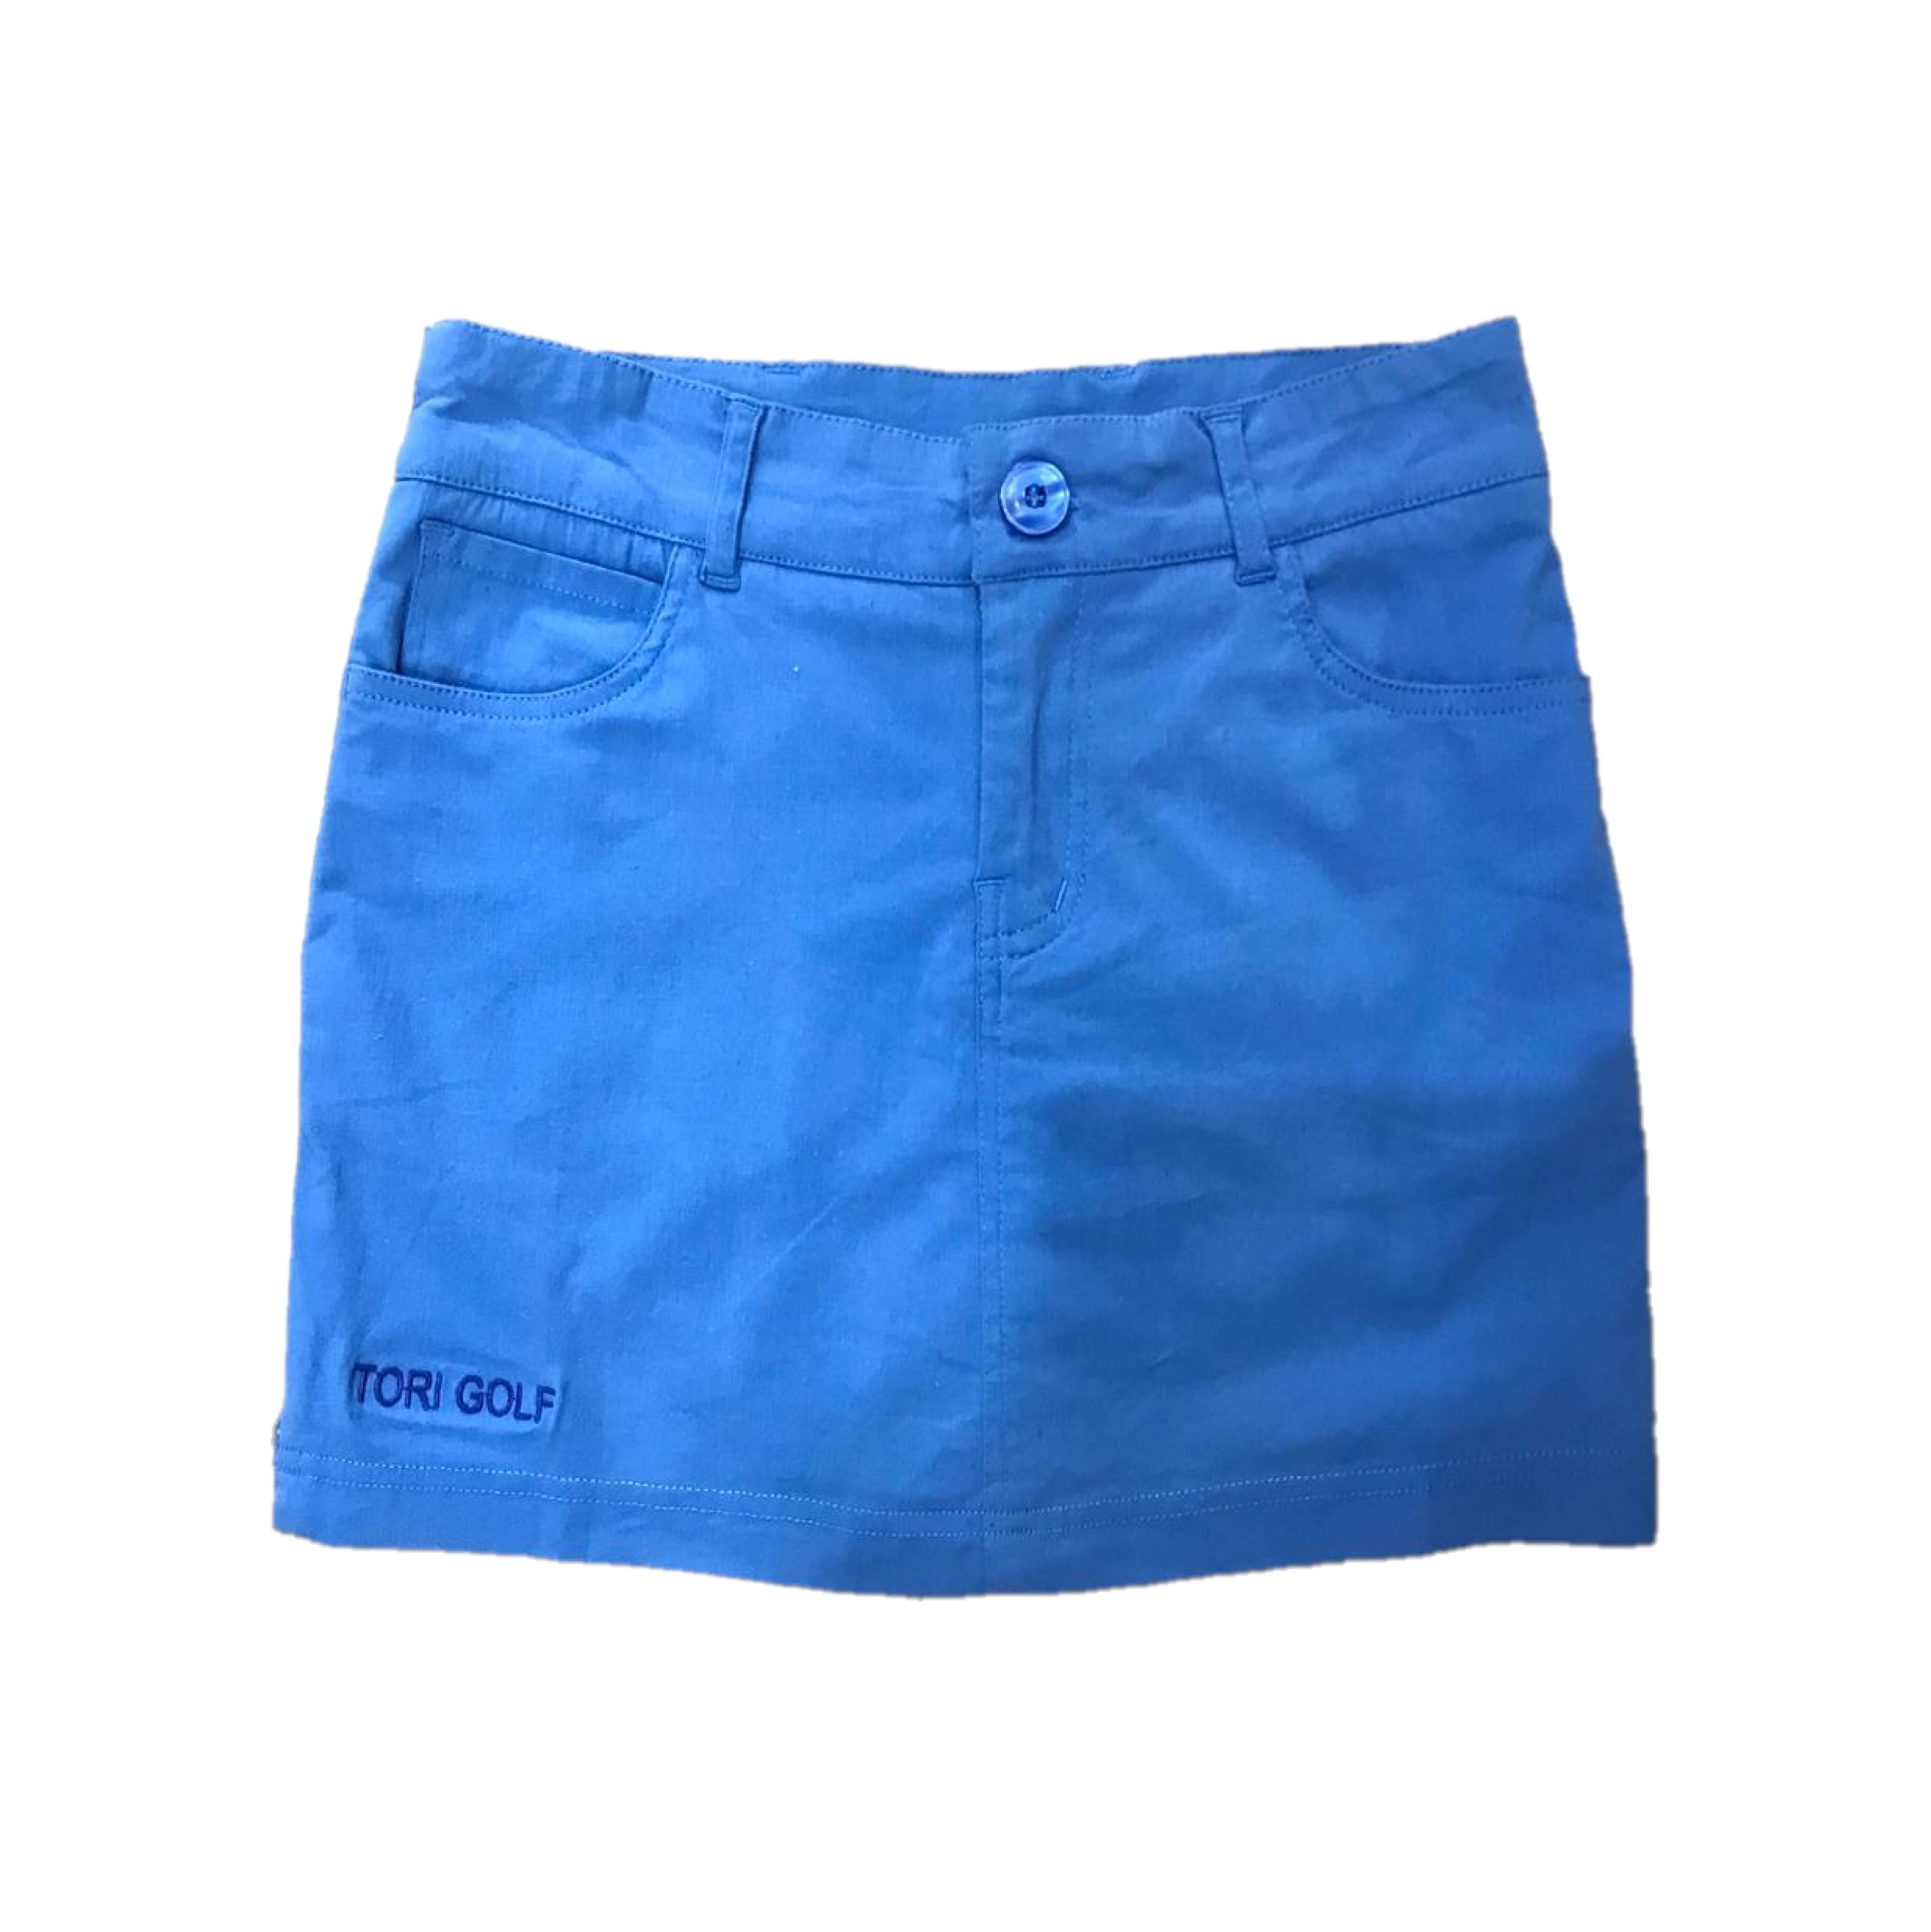 LS-021E || Skirt Blue With 2 Round Front Pockets 2 Rear Patch Front Zipper And 2 Zipped Side Vents.